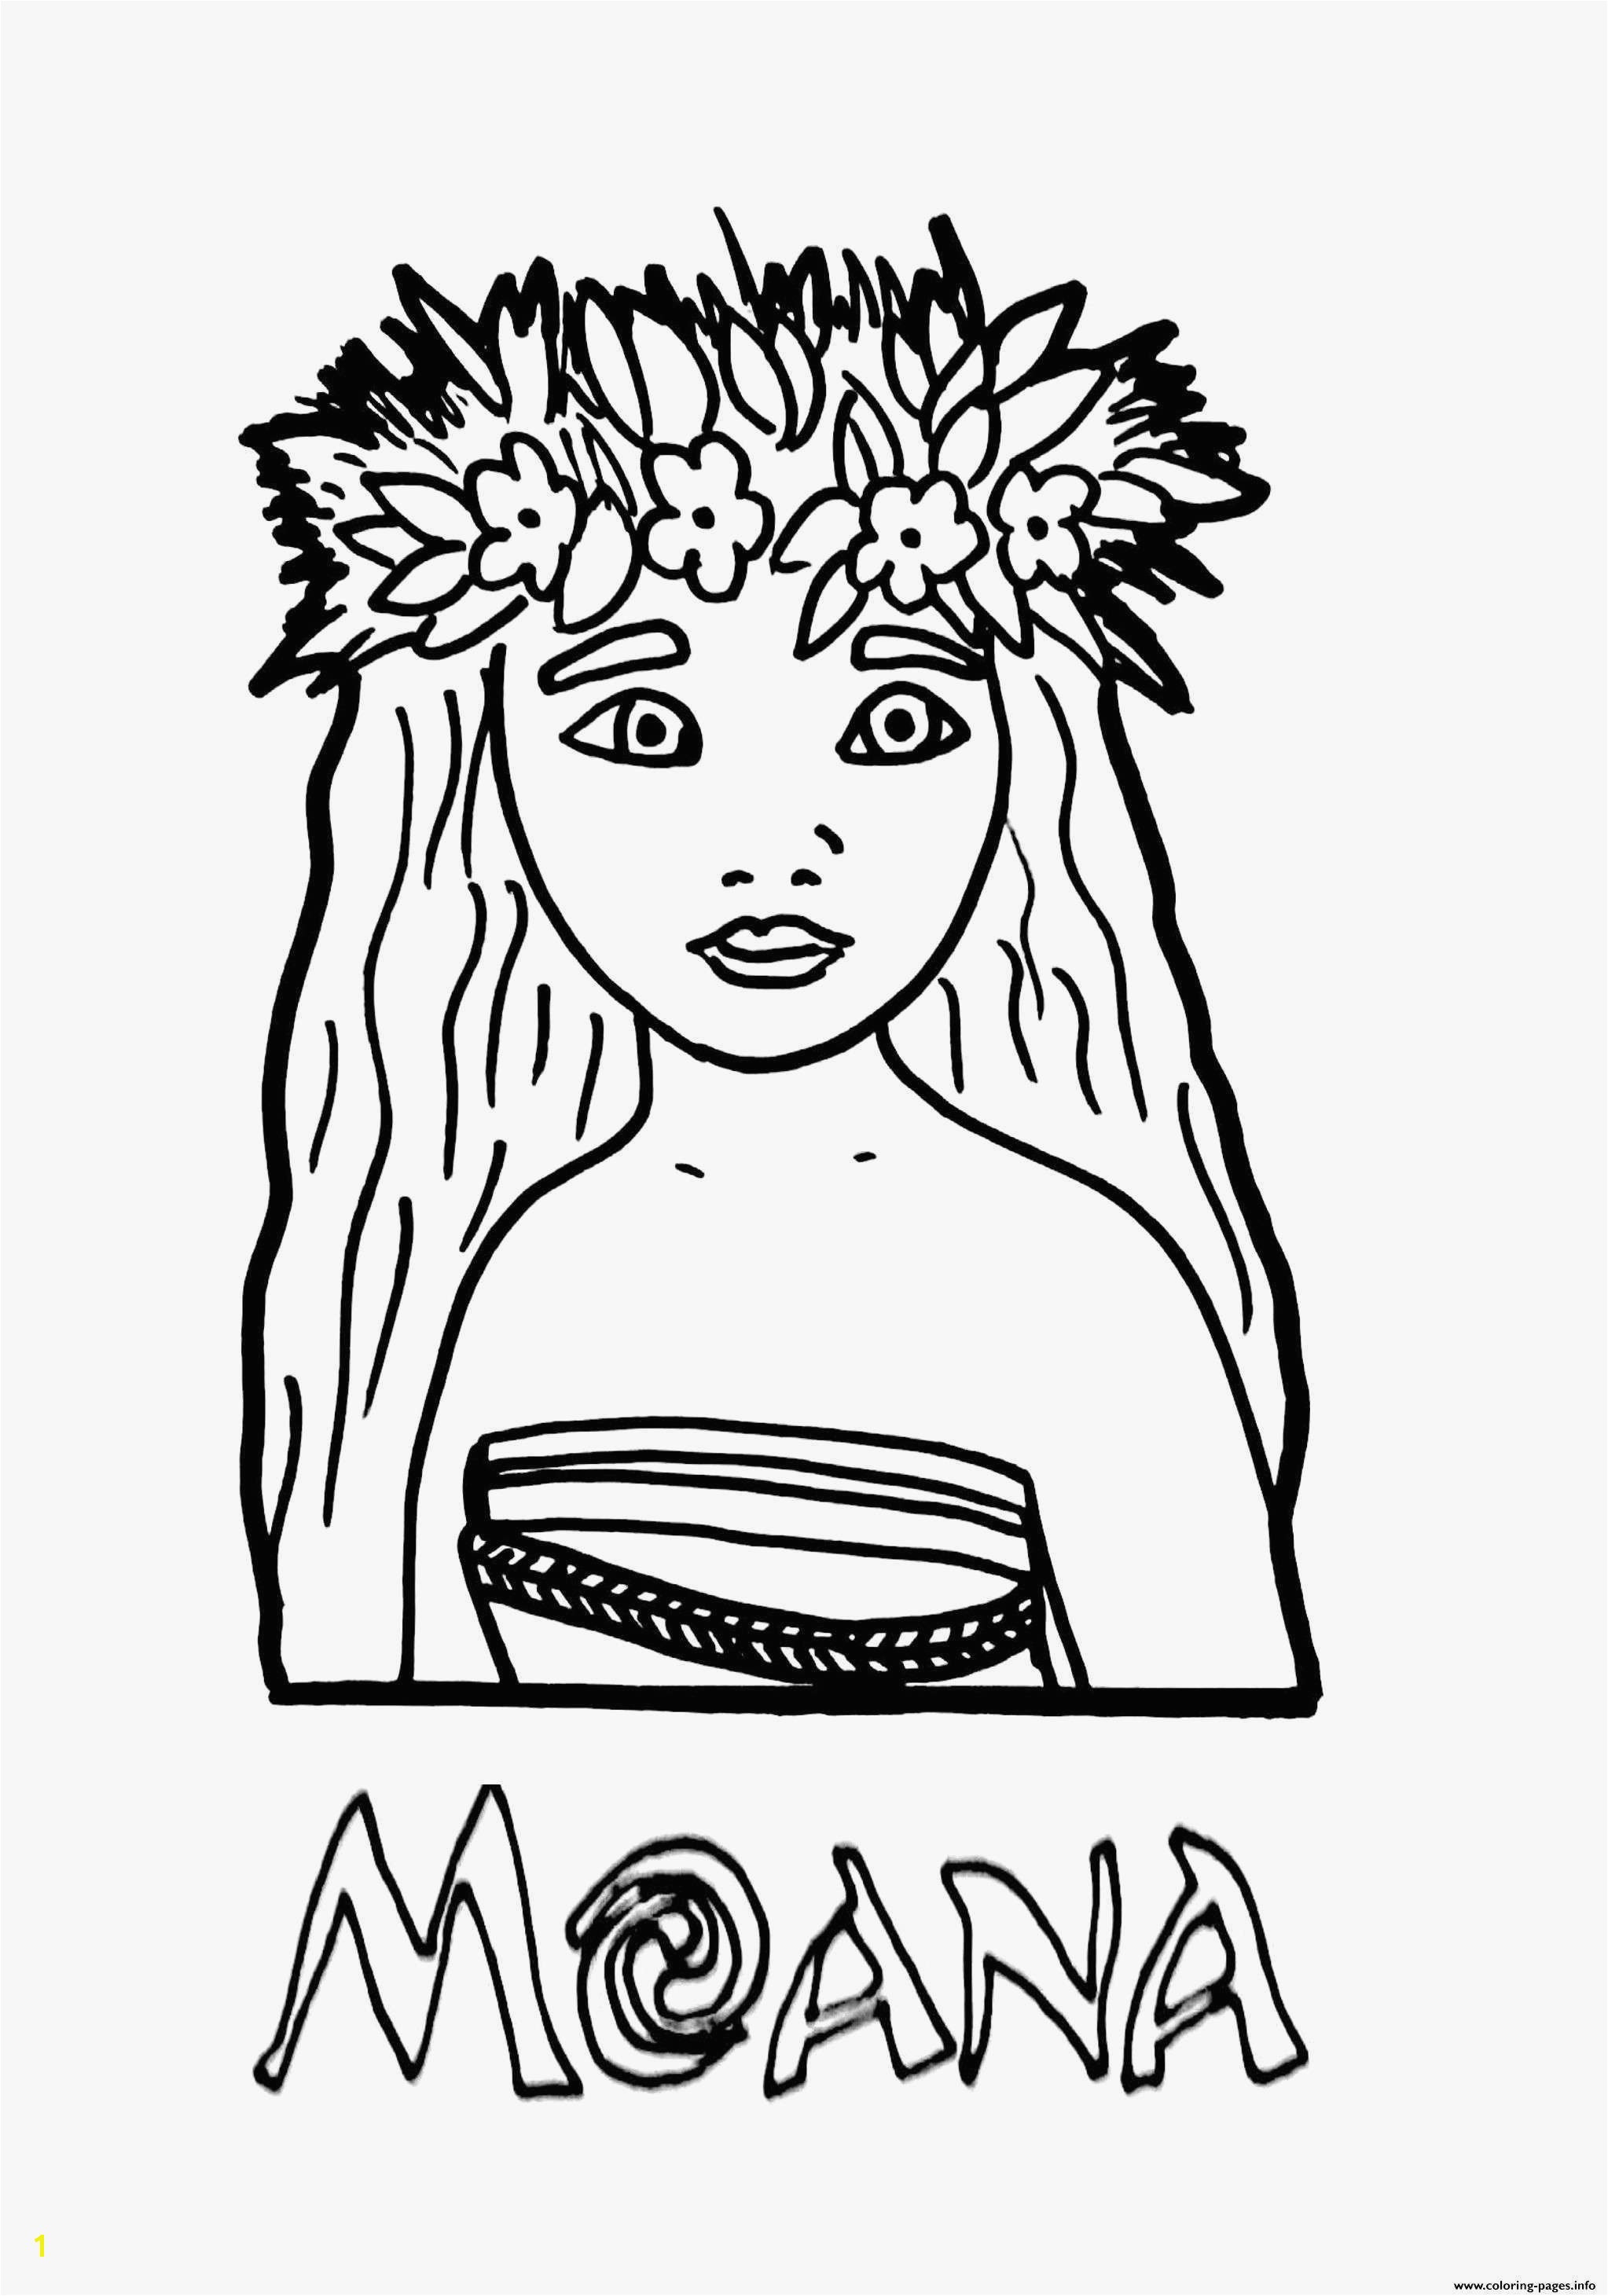 Coloring Pages Of Diamonds Princess Crown Coloring Pages to Print